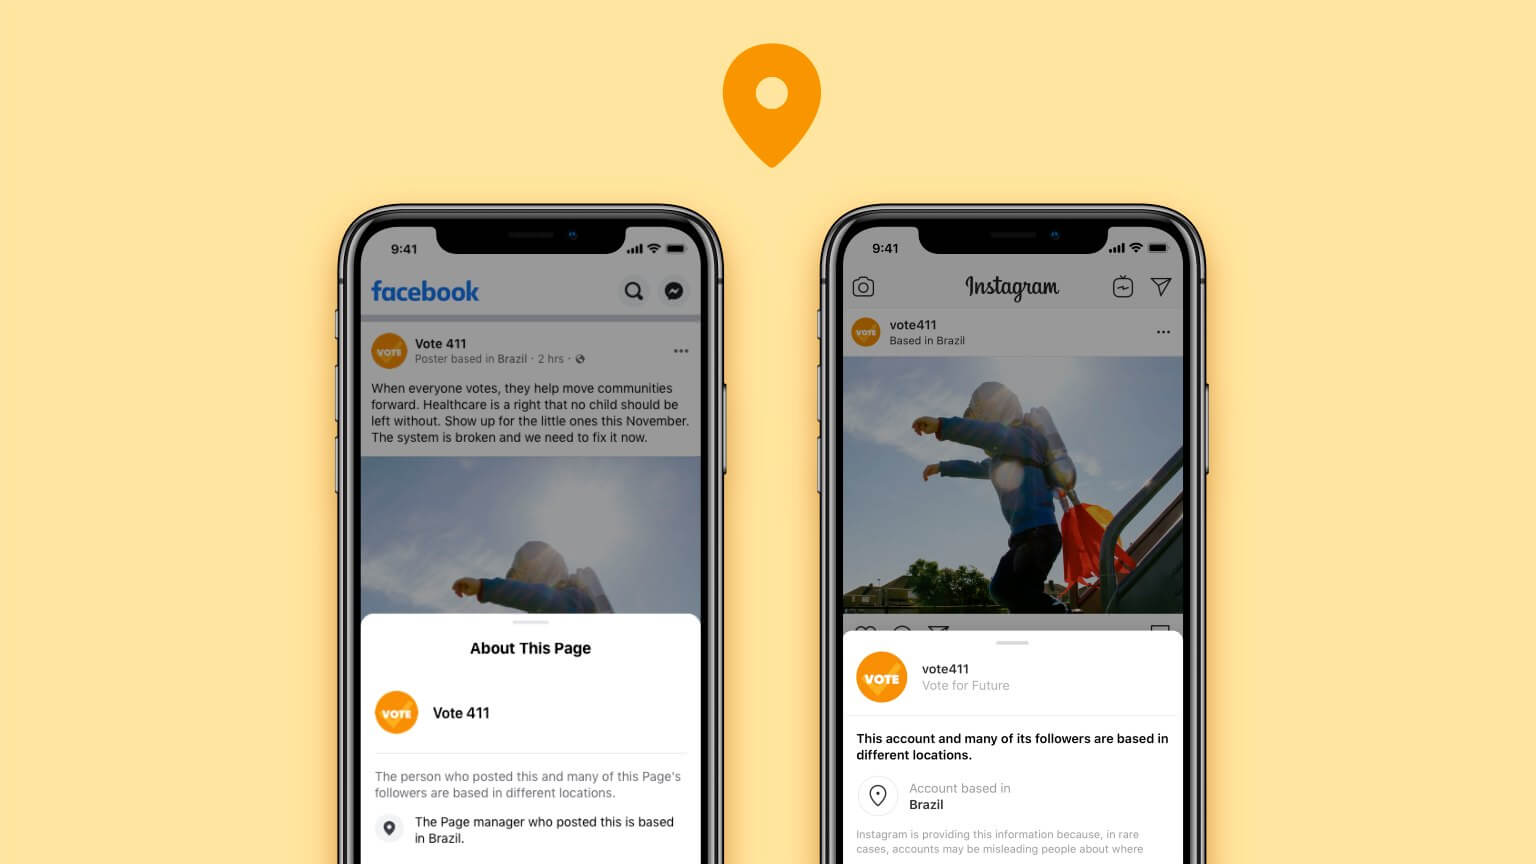 Facebook is adding location data to posts from Facebook and Instagram accounts with large audiences